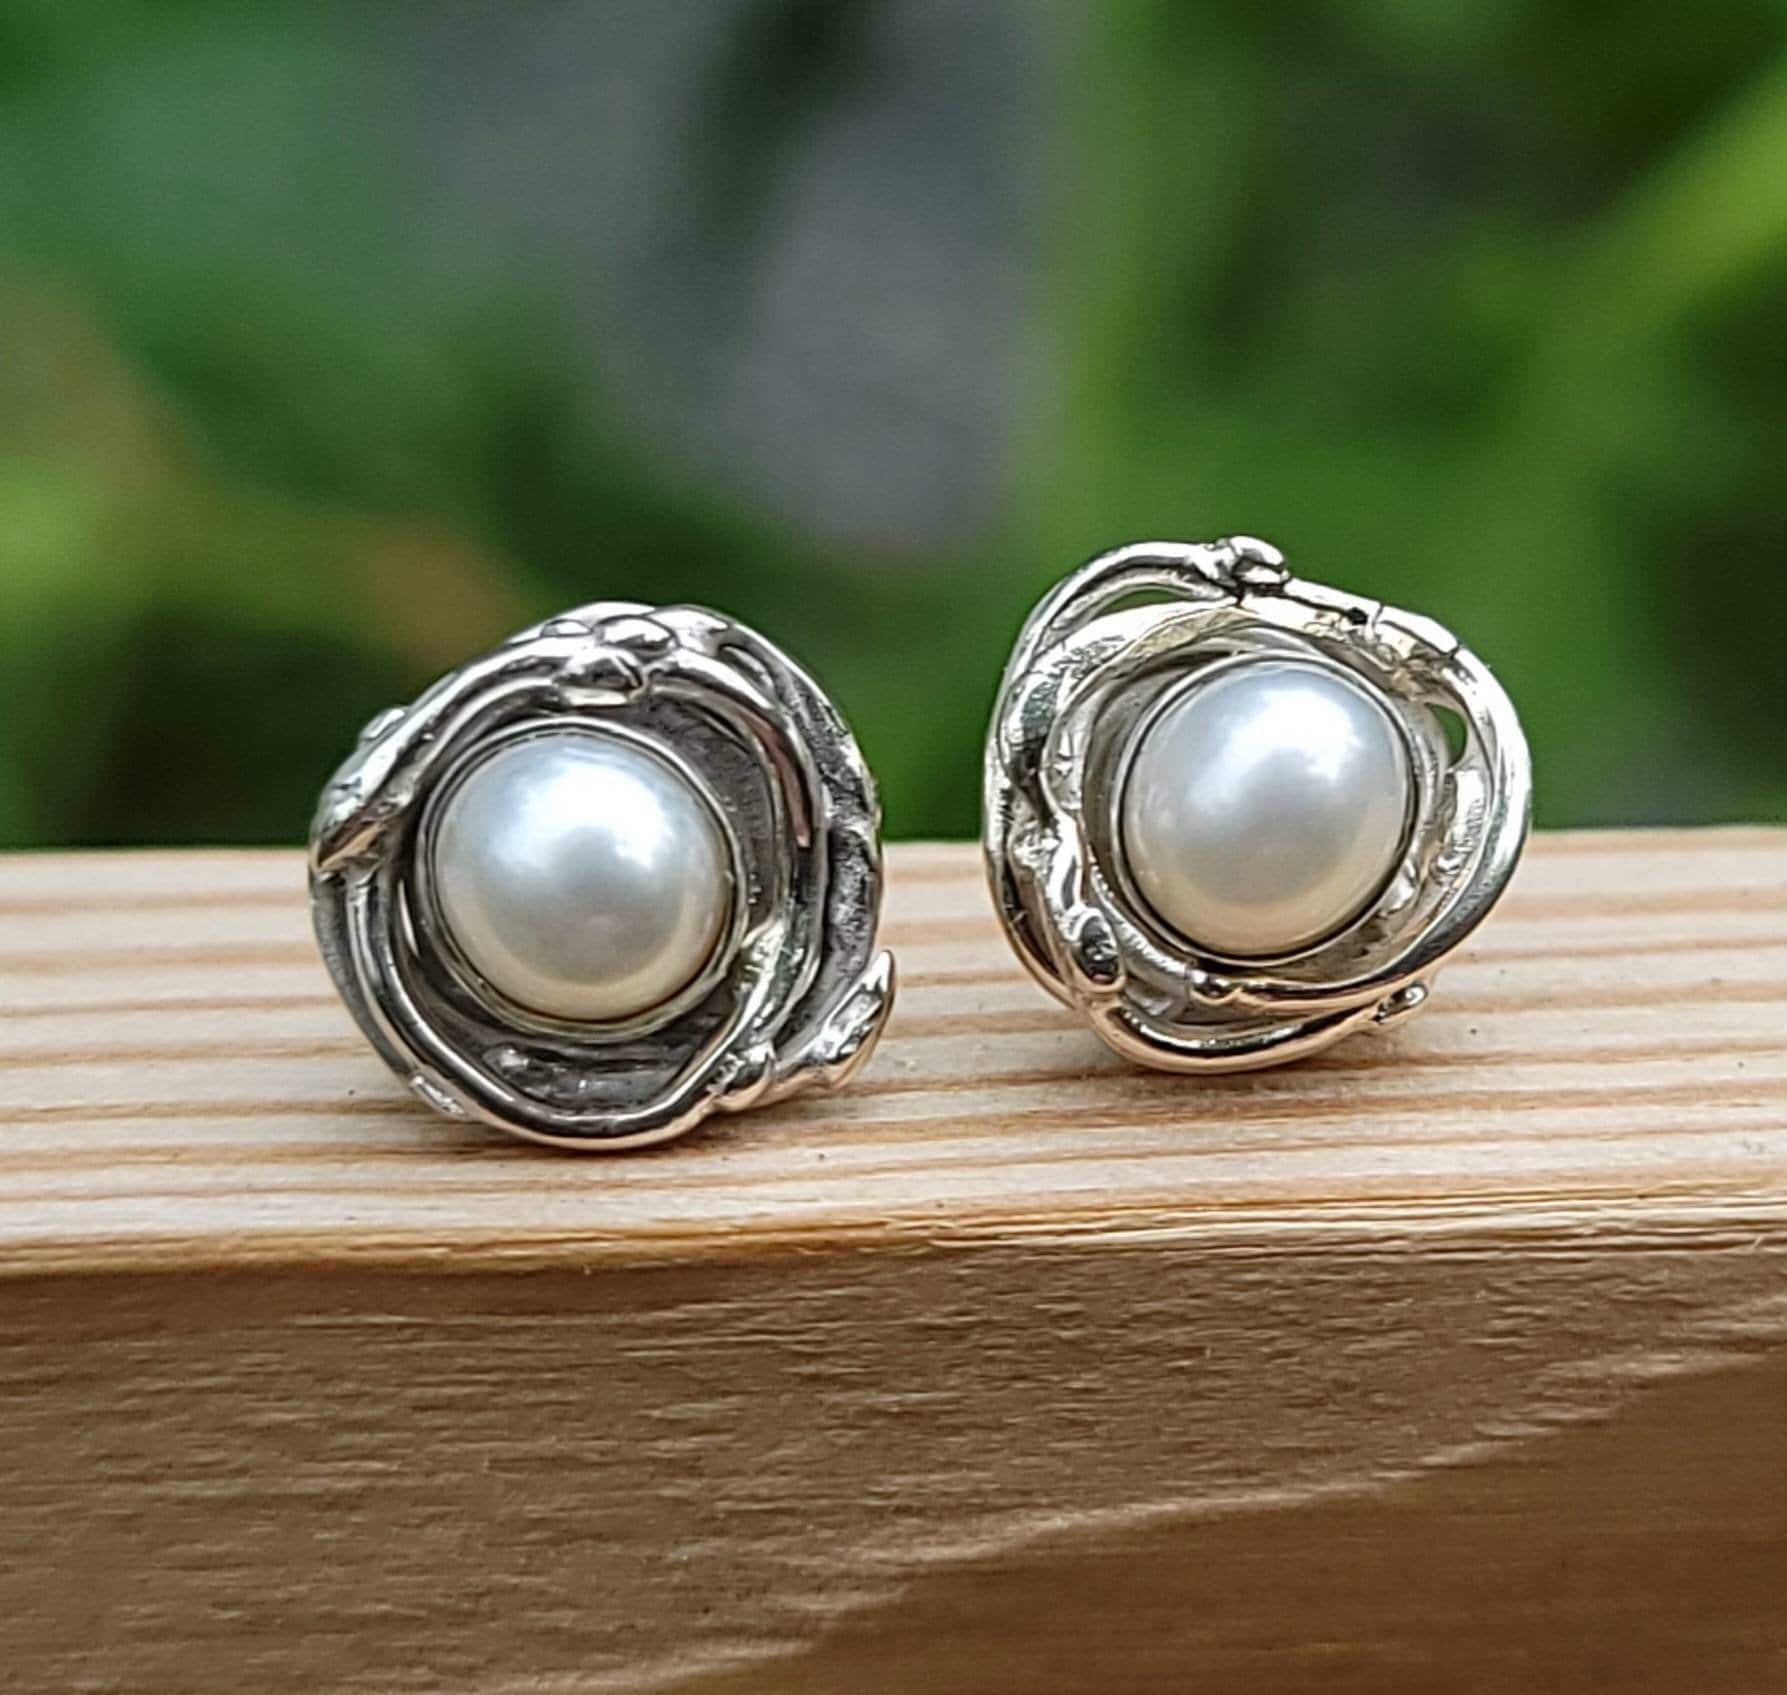 13mm Hypoallergenic Sterling Silver large earring backs for droopy